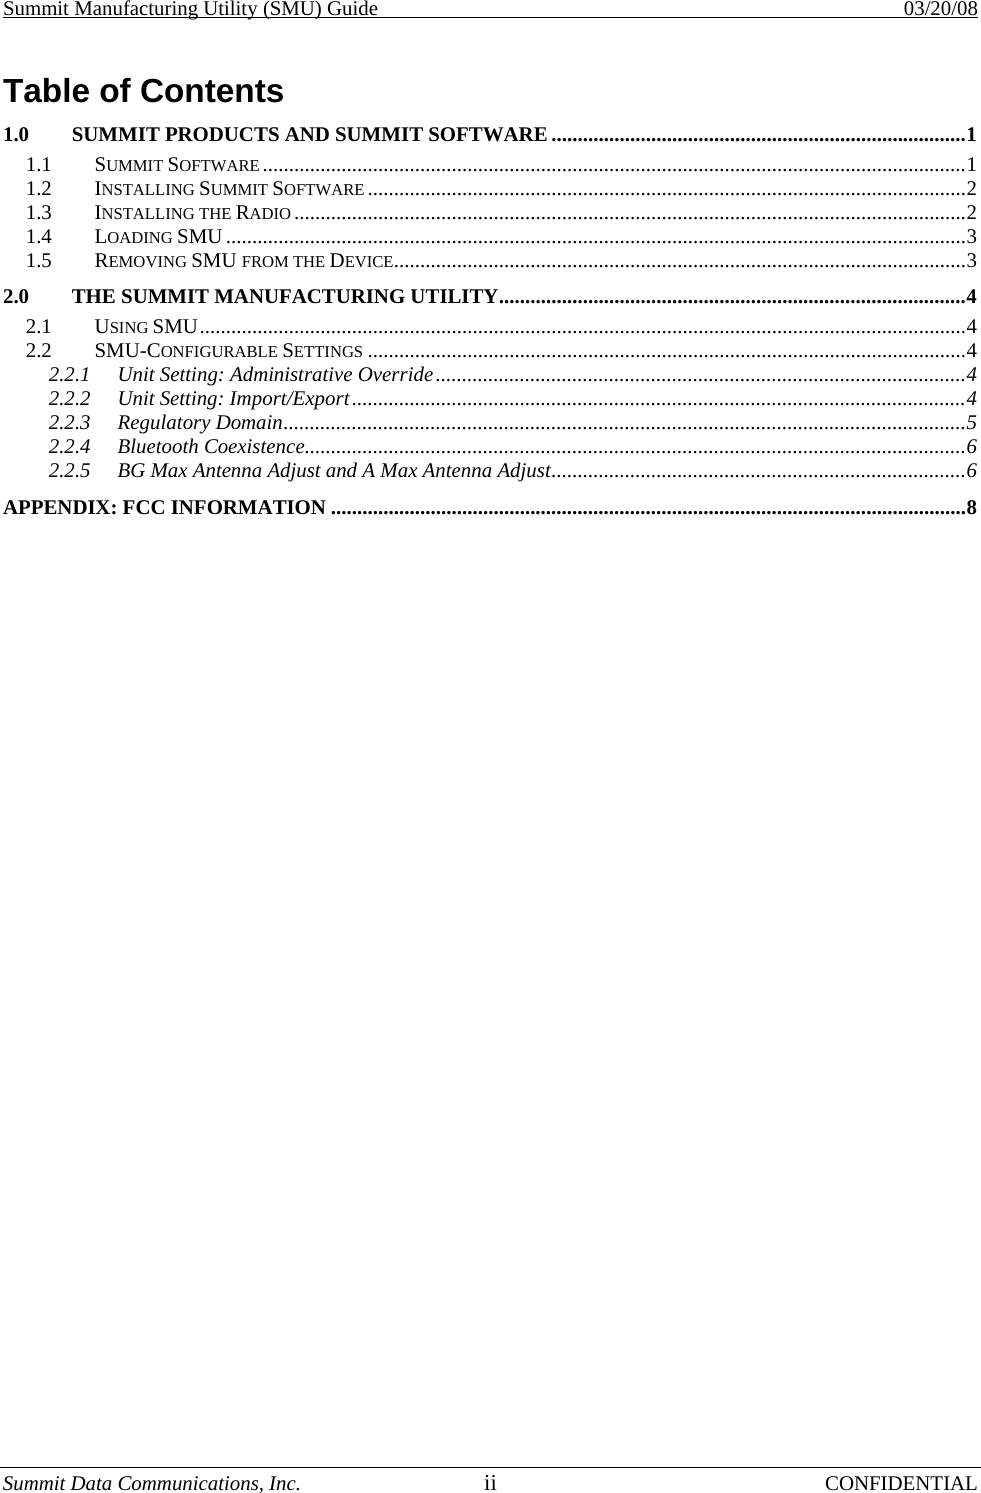 Summit Manufacturing Utility (SMU) Guide    03/20/08 Summit Data Communications, Inc.  ii CONFIDENTIAL Table of Contents 1.0 SUMMIT PRODUCTS AND SUMMIT SOFTWARE ...............................................................................1 1.1 SUMMIT SOFTWARE ......................................................................................................................................1 1.2 INSTALLING SUMMIT SOFTWARE ..................................................................................................................2 1.3 INSTALLING THE RADIO ................................................................................................................................2 1.4 LOADING SMU .............................................................................................................................................3 1.5 REMOVING SMU FROM THE DEVICE.............................................................................................................3 2.0 THE SUMMIT MANUFACTURING UTILITY.........................................................................................4 2.1 USING SMU..................................................................................................................................................4 2.2 SMU-CONFIGURABLE SETTINGS ..................................................................................................................4 2.2.1 Unit Setting: Administrative Override.....................................................................................................4 2.2.2 Unit Setting: Import/Export.....................................................................................................................4 2.2.3 Regulatory Domain..................................................................................................................................5 2.2.4 Bluetooth Coexistence..............................................................................................................................6 2.2.5 BG Max Antenna Adjust and A Max Antenna Adjust...............................................................................6 APPENDIX: FCC INFORMATION .........................................................................................................................8 